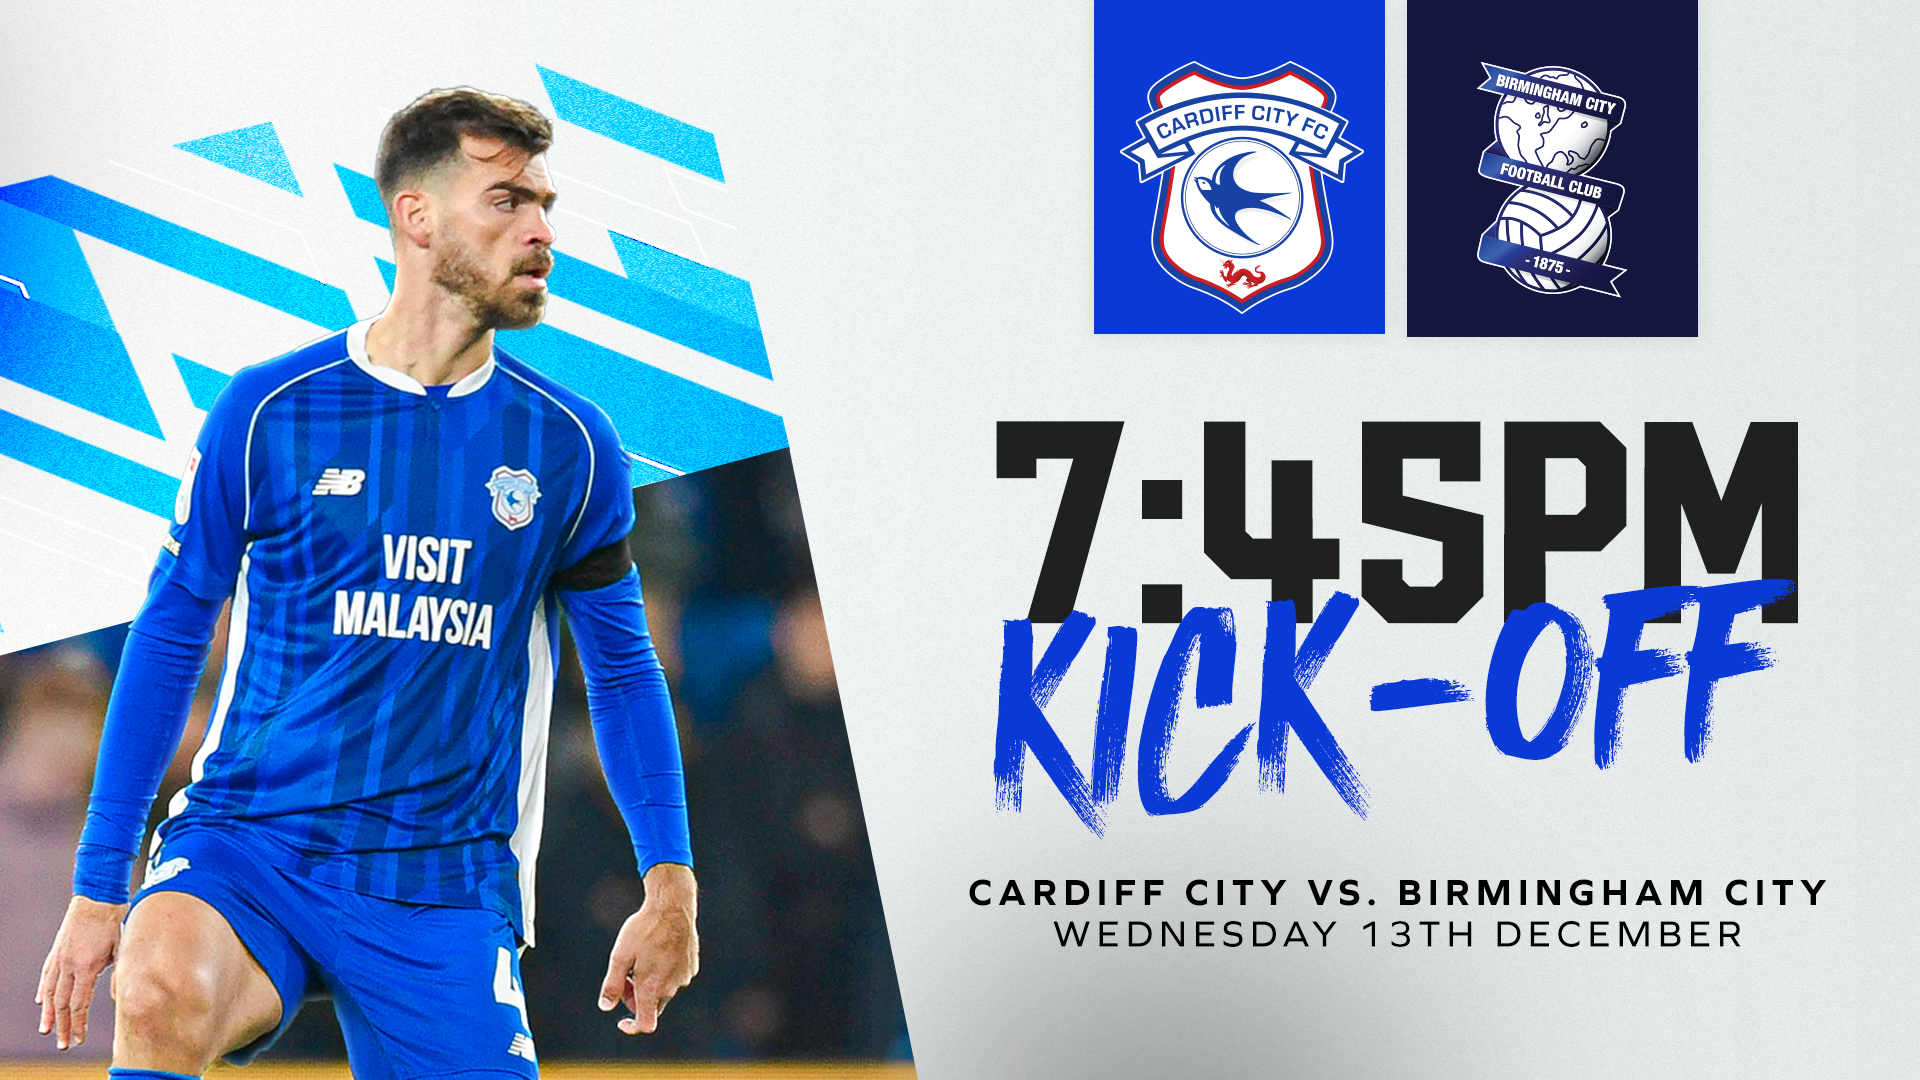 Birmingham City will be without seven players against Cardiff City